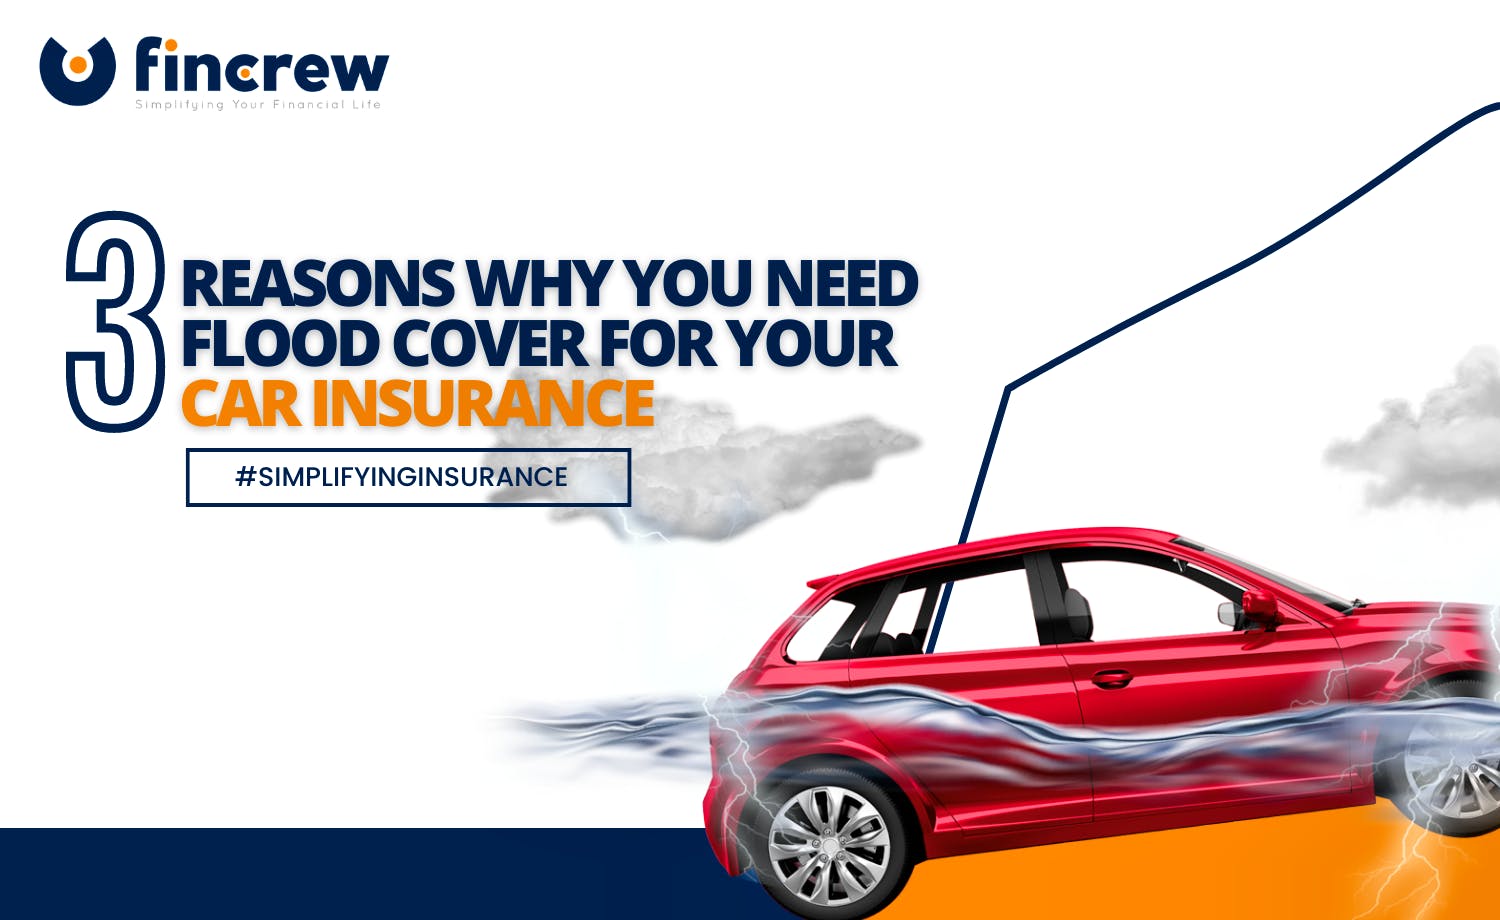 Why You Need Flood Cover For Your Car Insurance